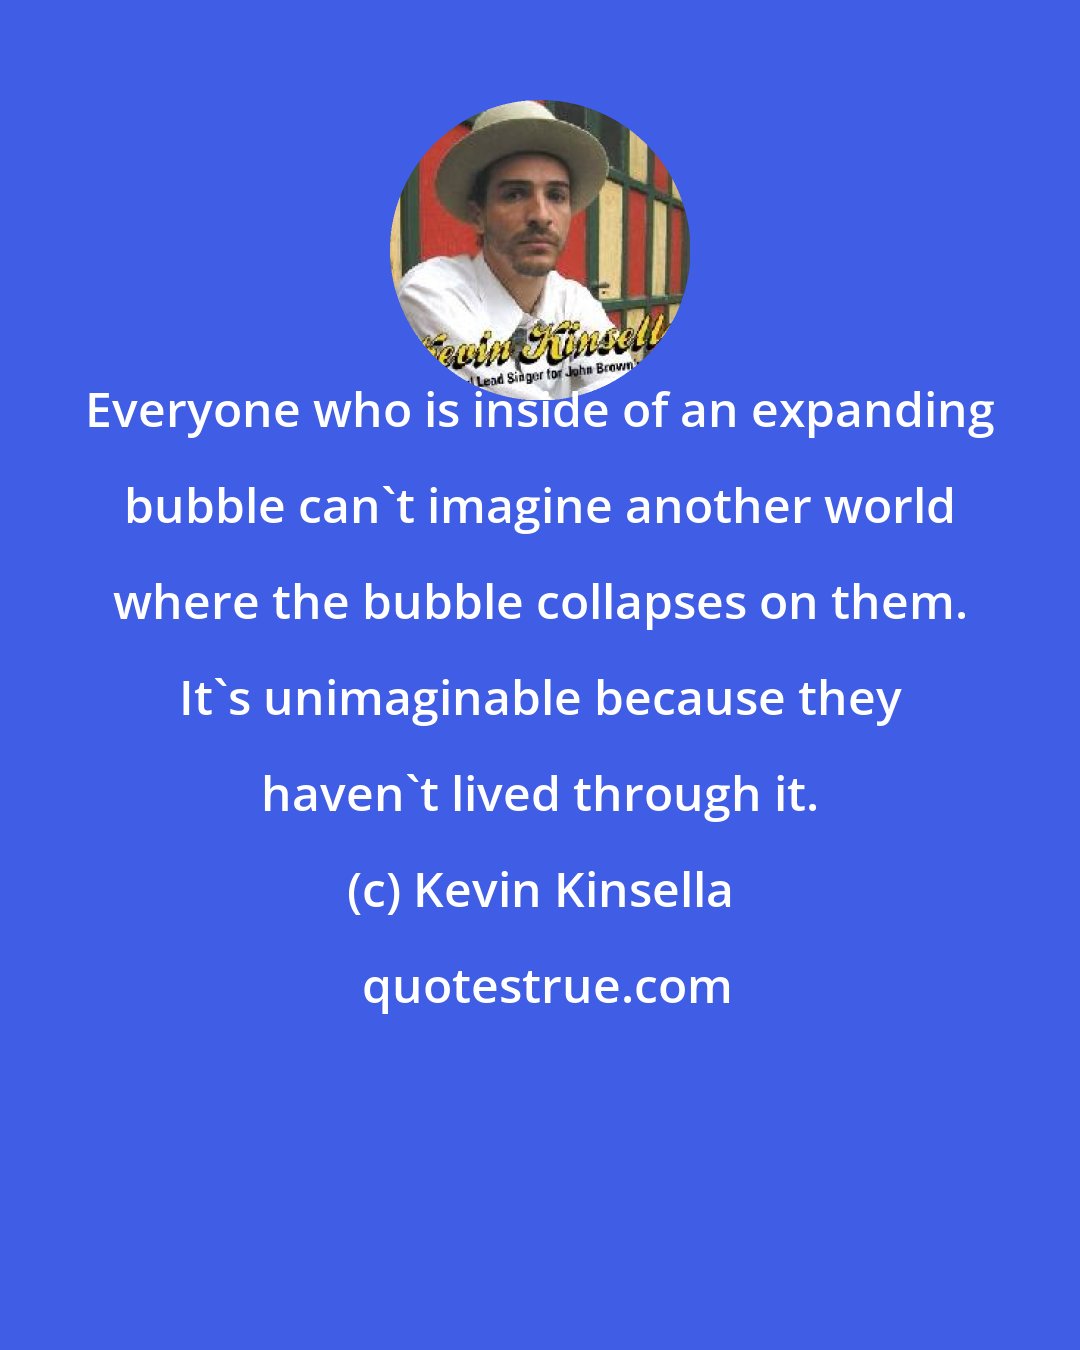 Kevin Kinsella: Everyone who is inside of an expanding bubble can't imagine another world where the bubble collapses on them. It's unimaginable because they haven't lived through it.